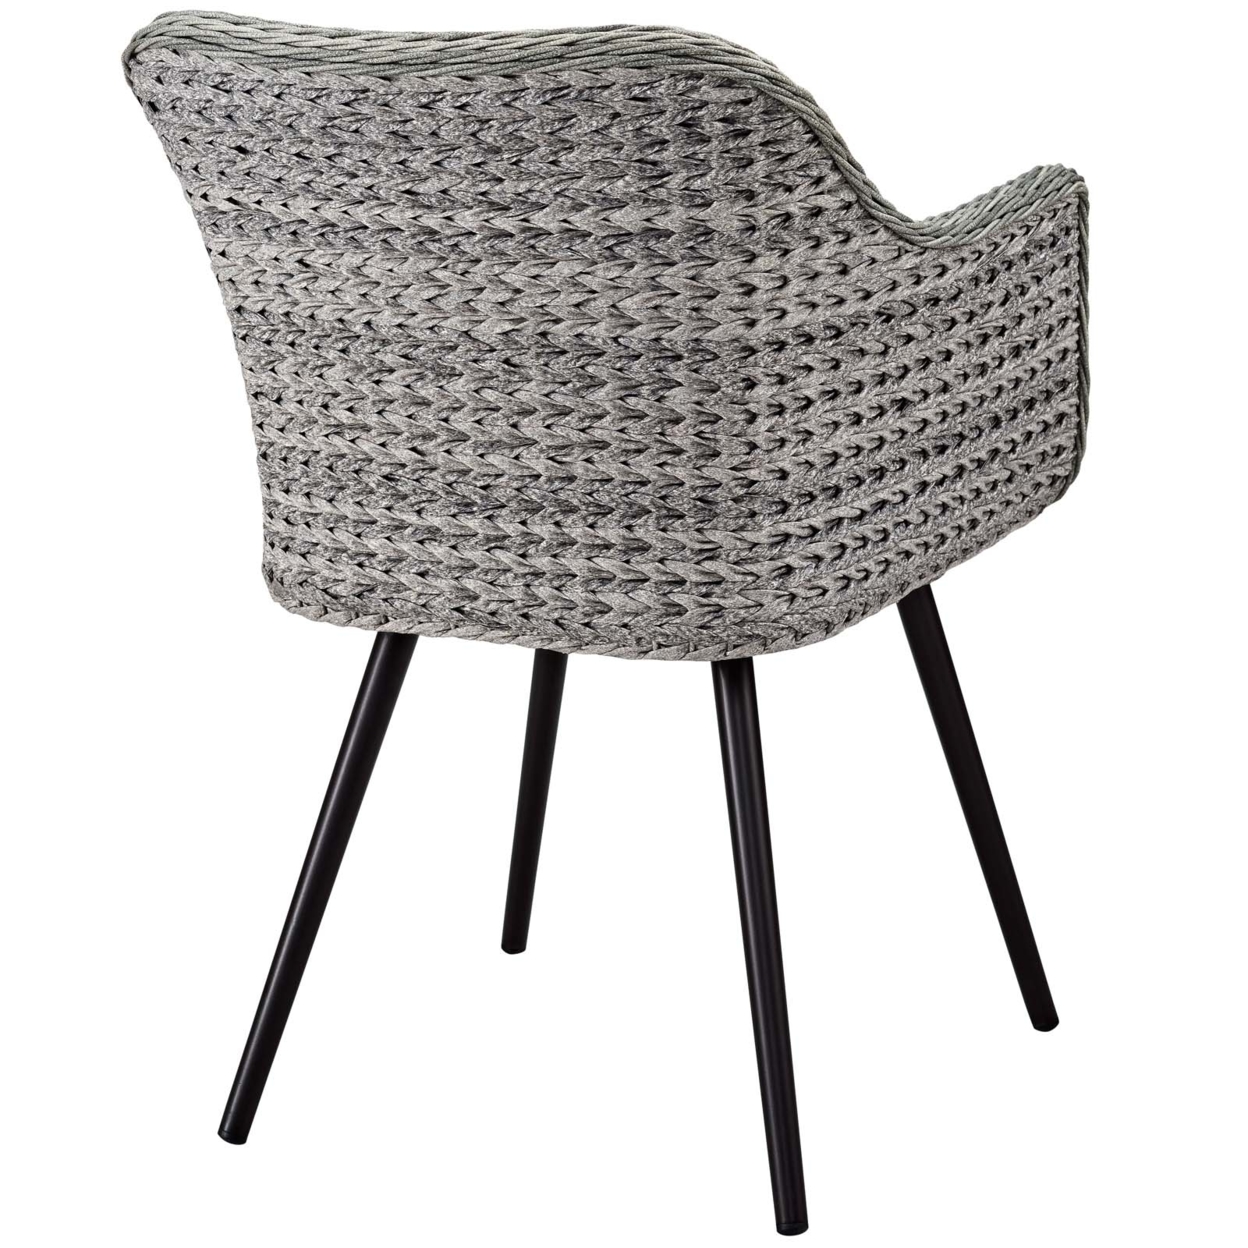 Endeavor Outdoor Patio Wicker Rattan Dining Armchair (3028-GRY-GRY)